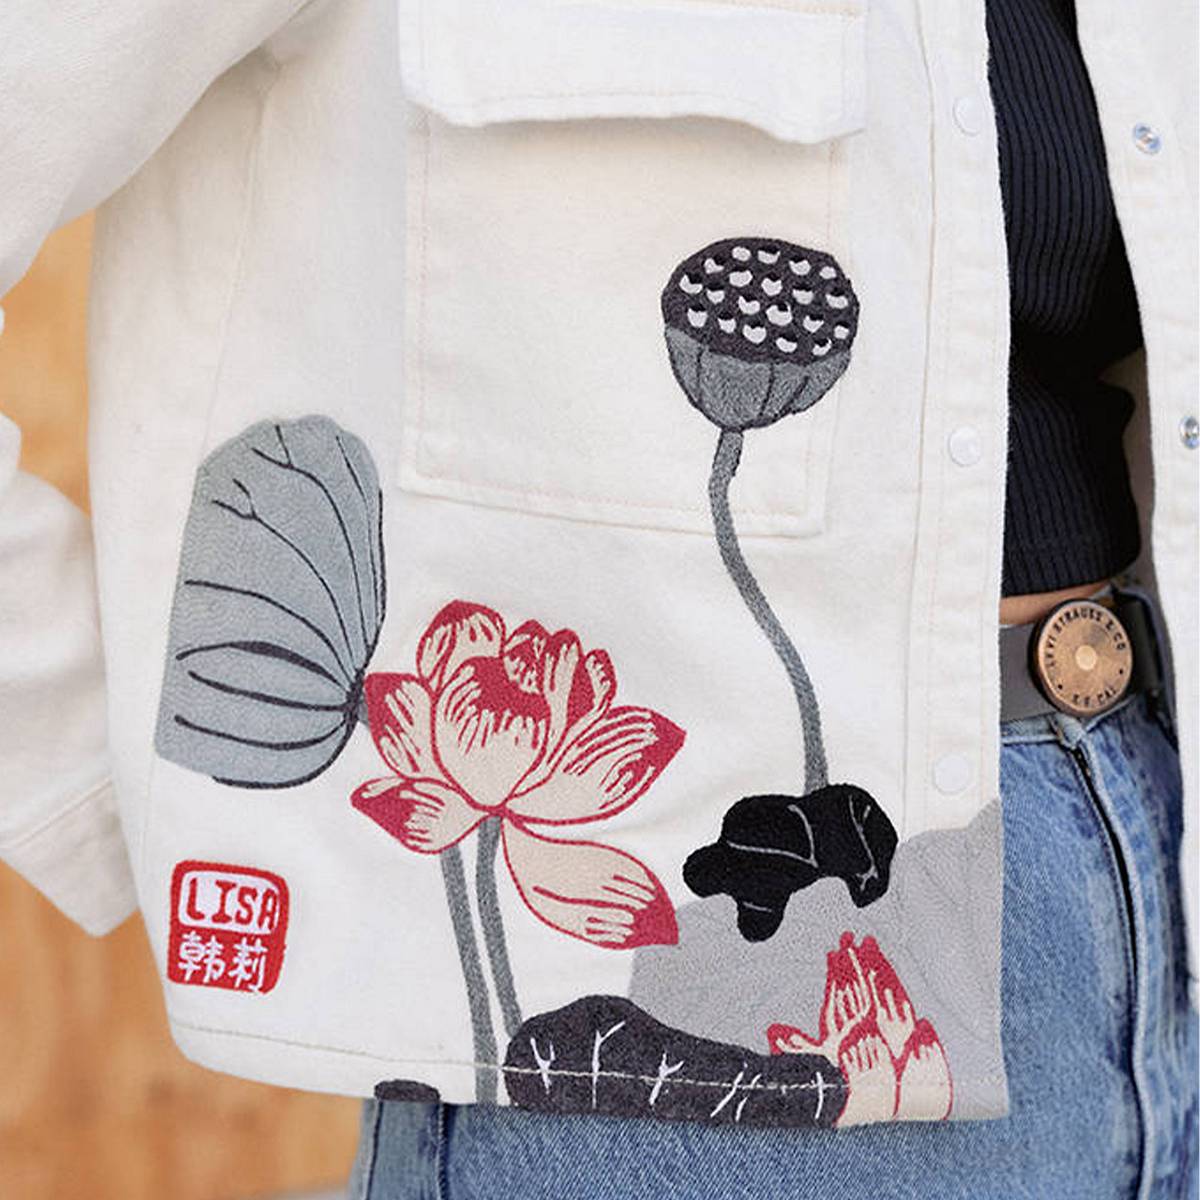 Detail shot of a white jacket with floral red, grey and black embroidery